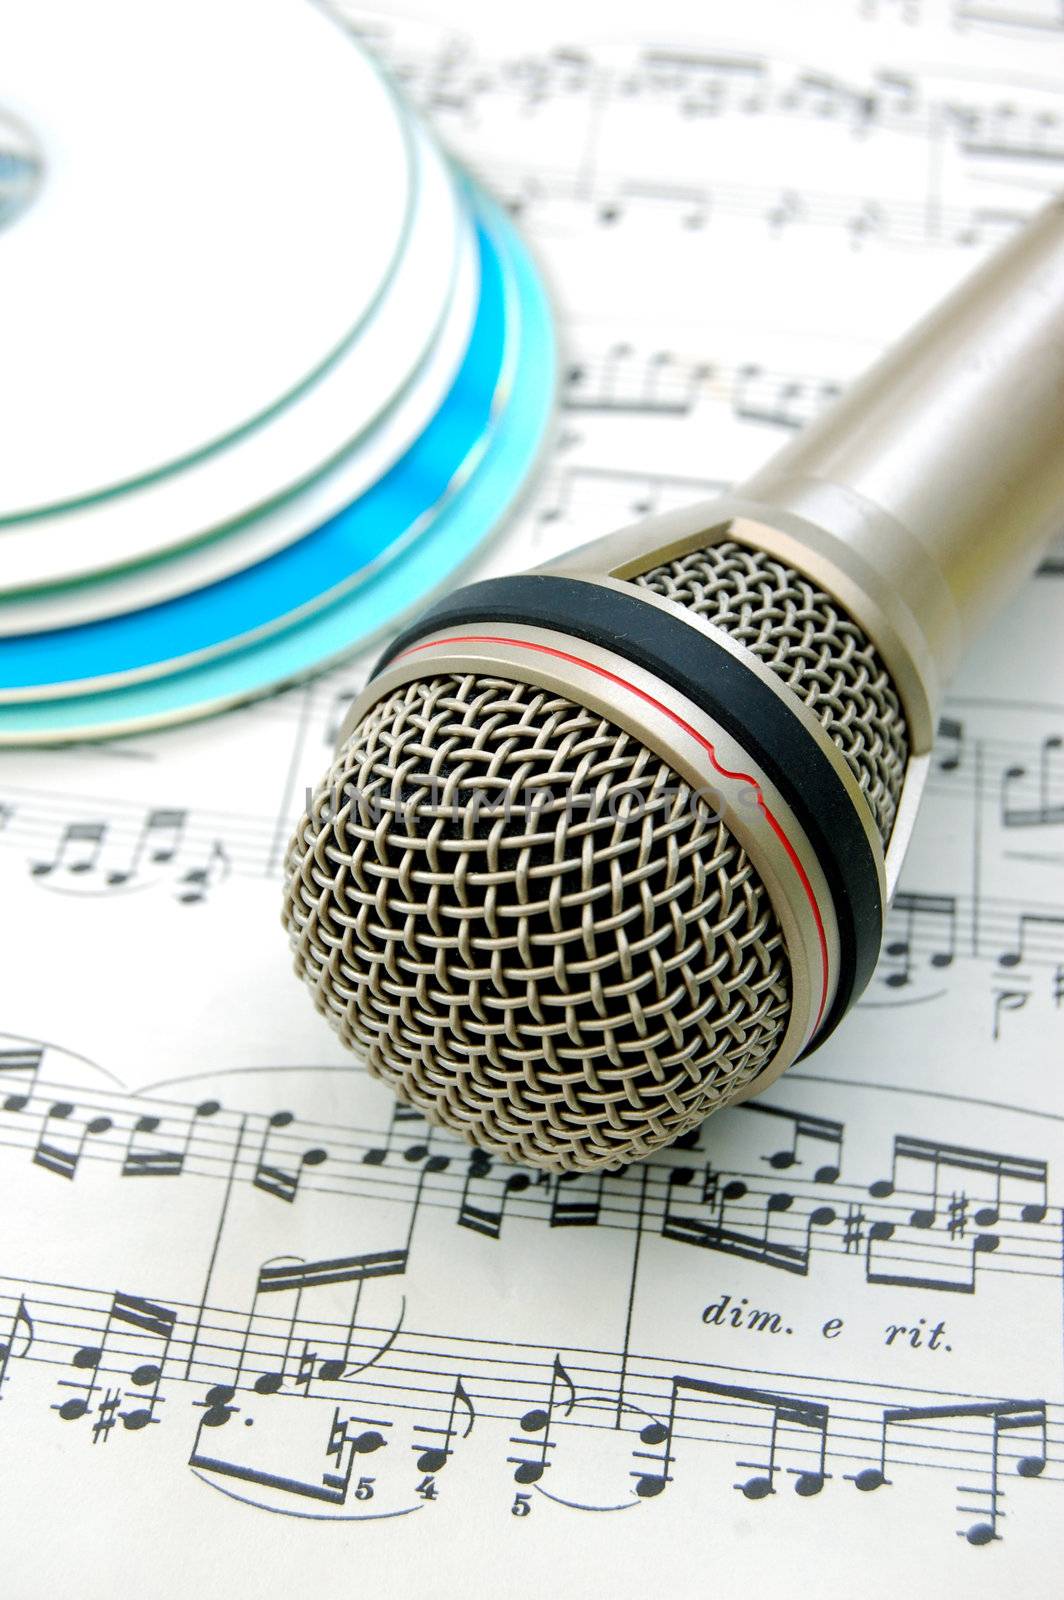 Microphone with music sheet and several cds